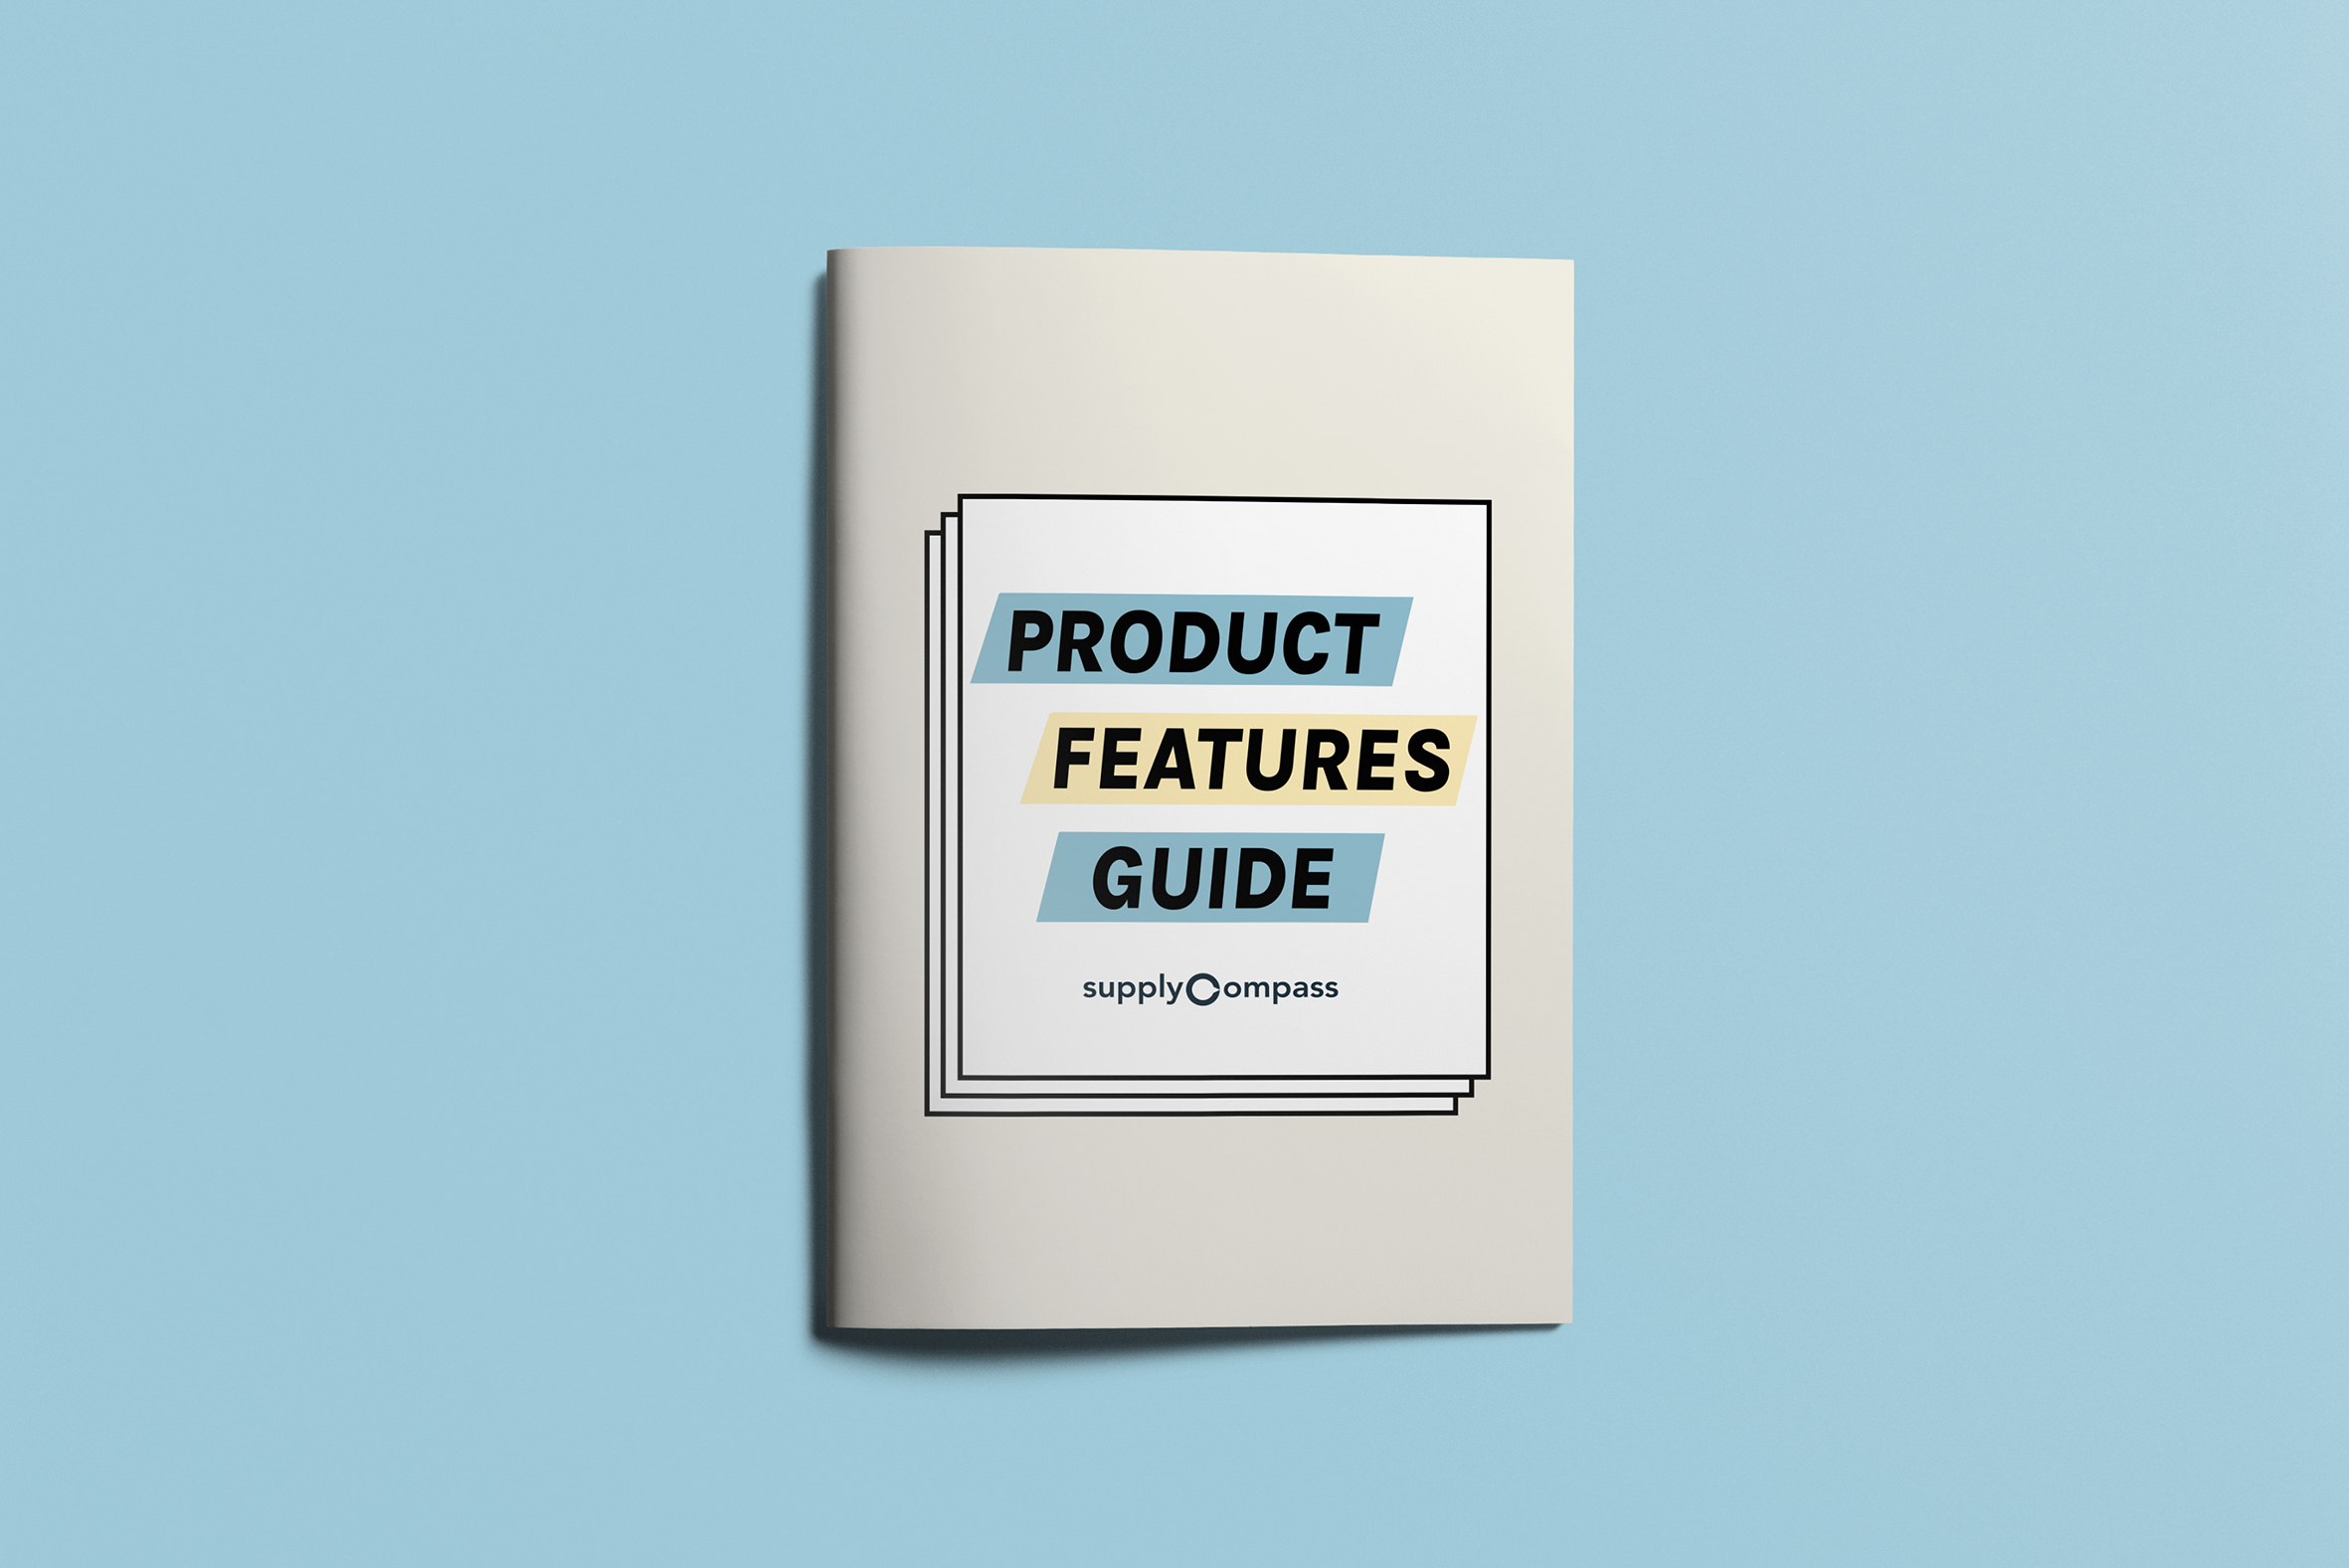 We’ve launched our comprehensive Product Features Guide!